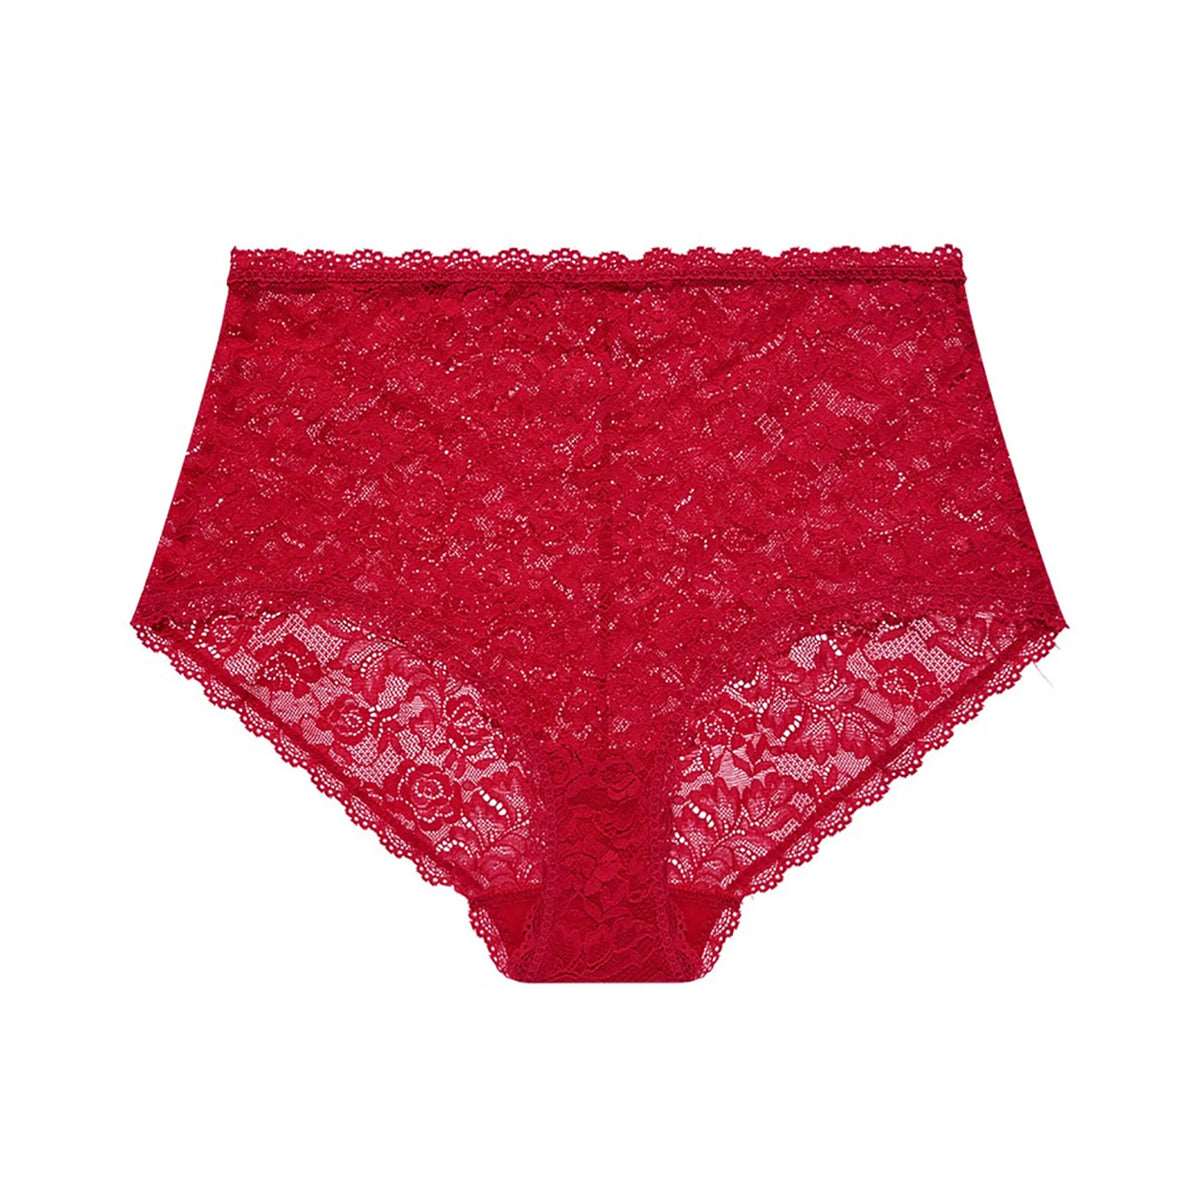 Aubade Rosessence Lace Full Brief